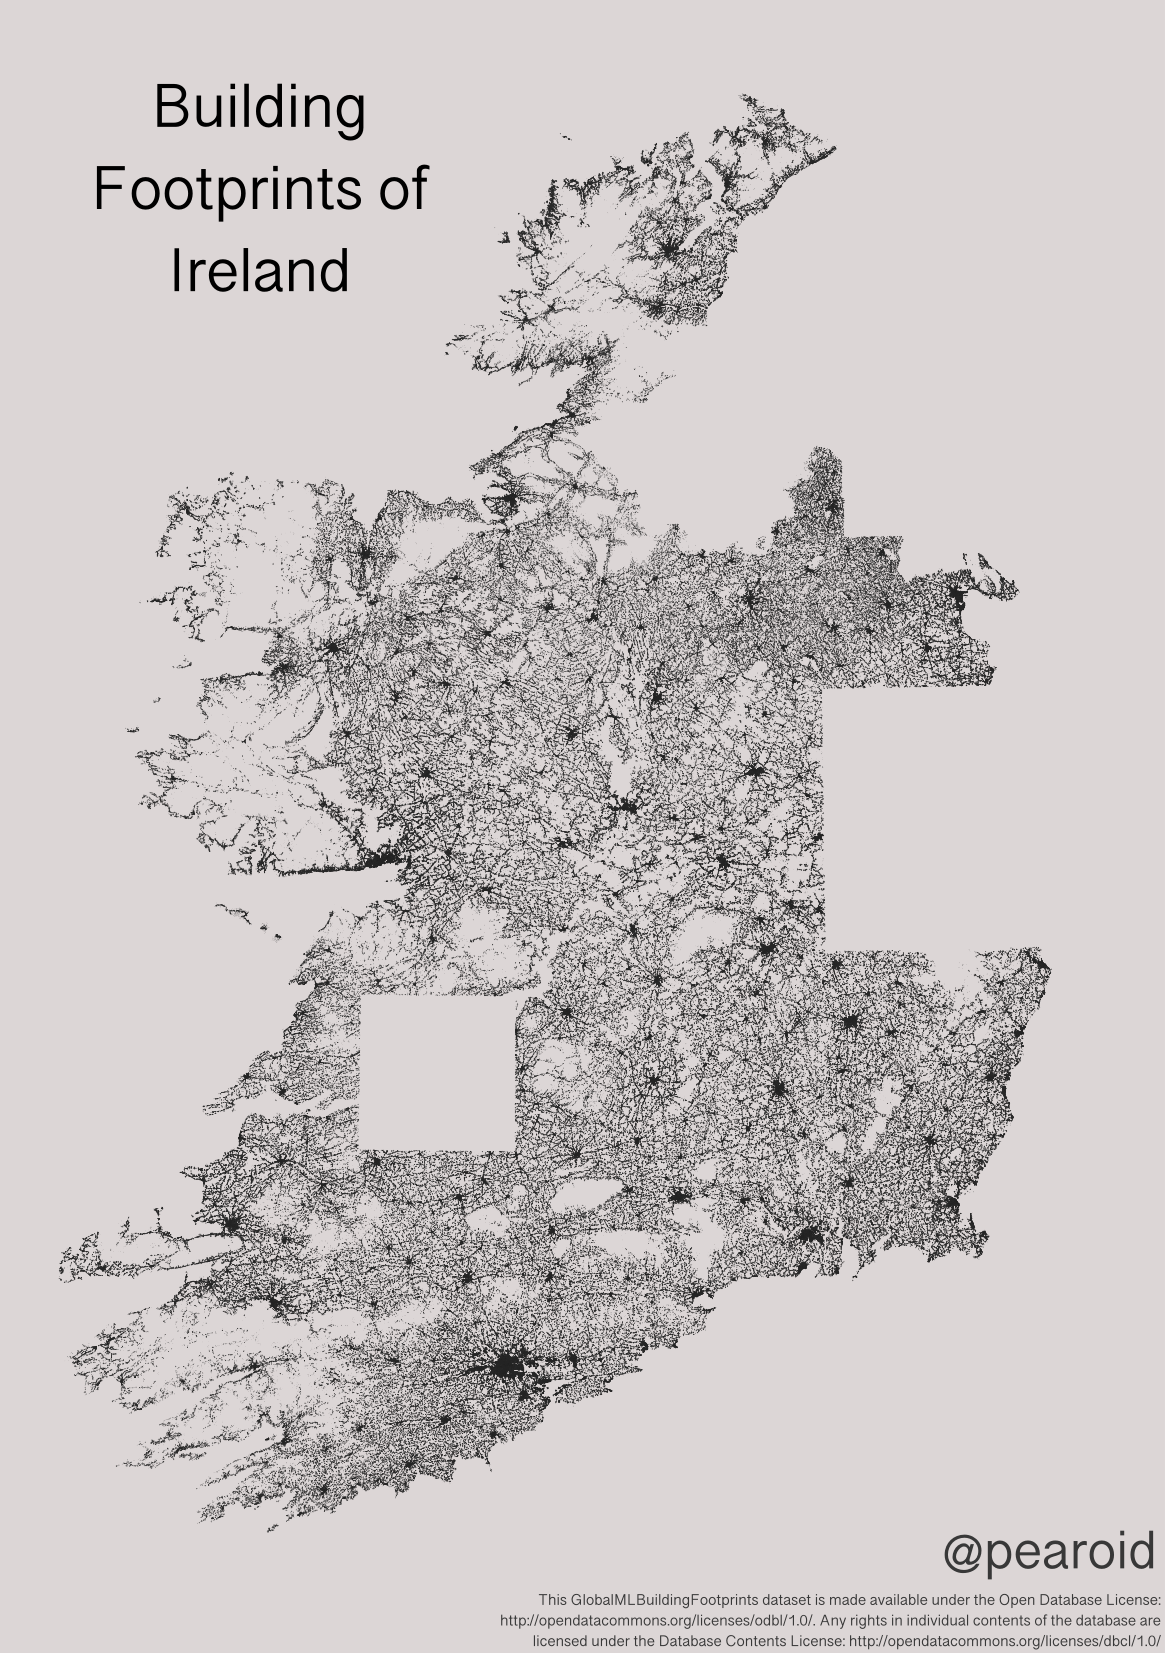 Building Footprints of Ireland from Microsoft